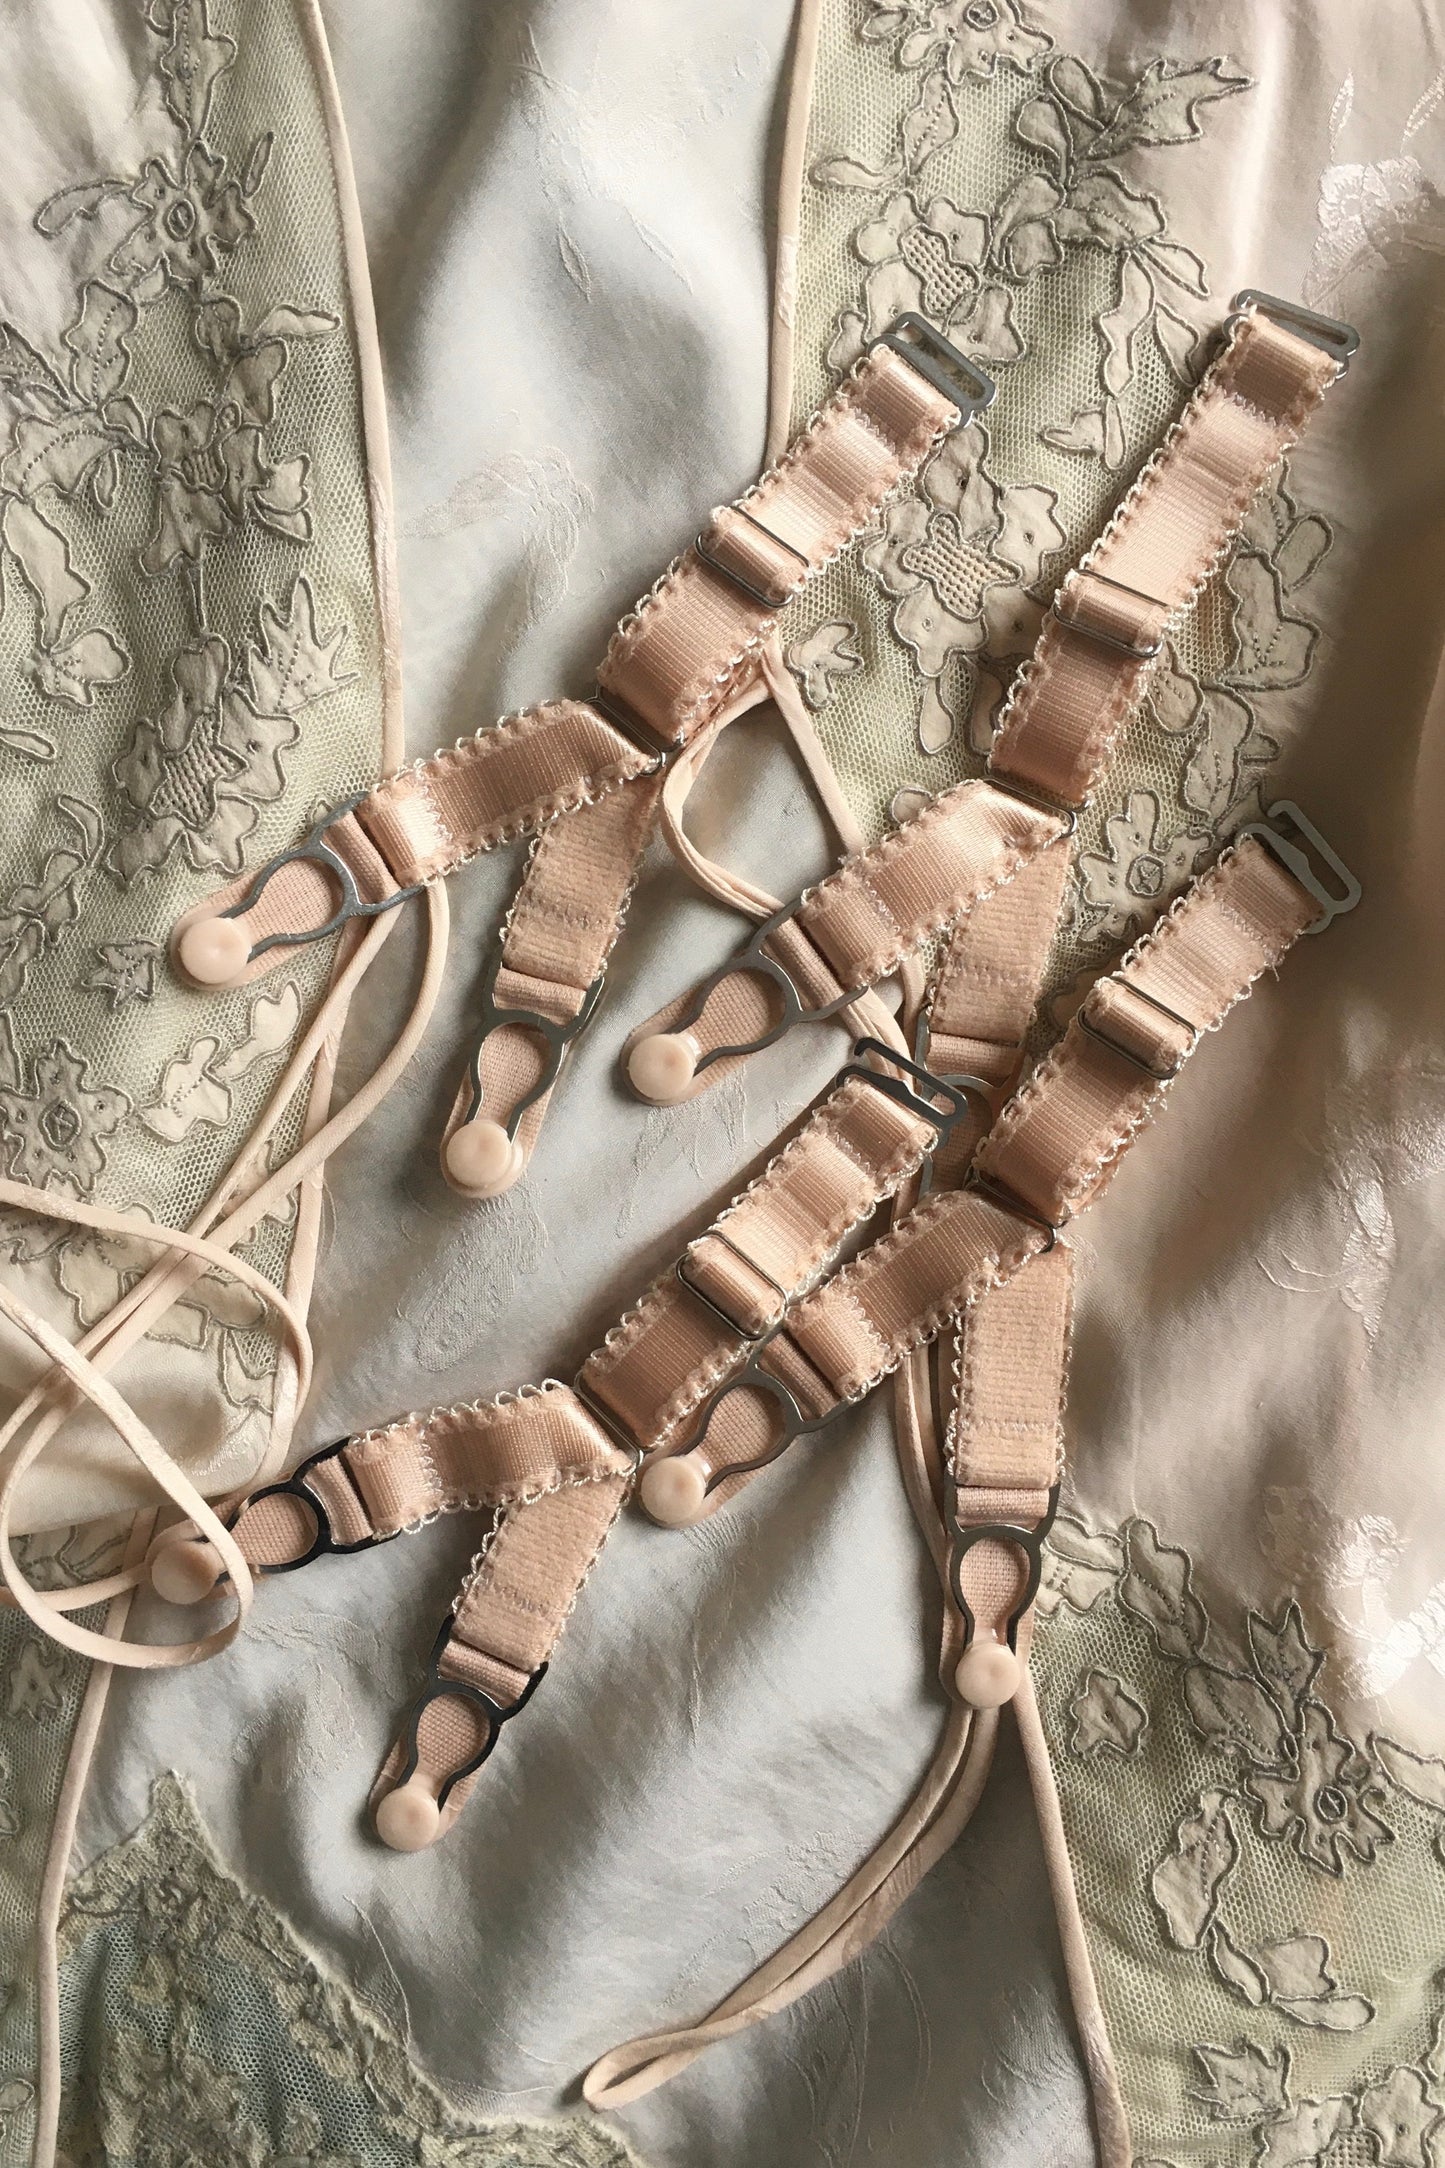 Double suspender straps  Y STRAP ADJUSTABLE replacement detachable suspender garter straps clips with hook for stockings. retro and vintage lingerie by Pip & Pantalaimon. replacement y strap garter clips in biscotti peach beige